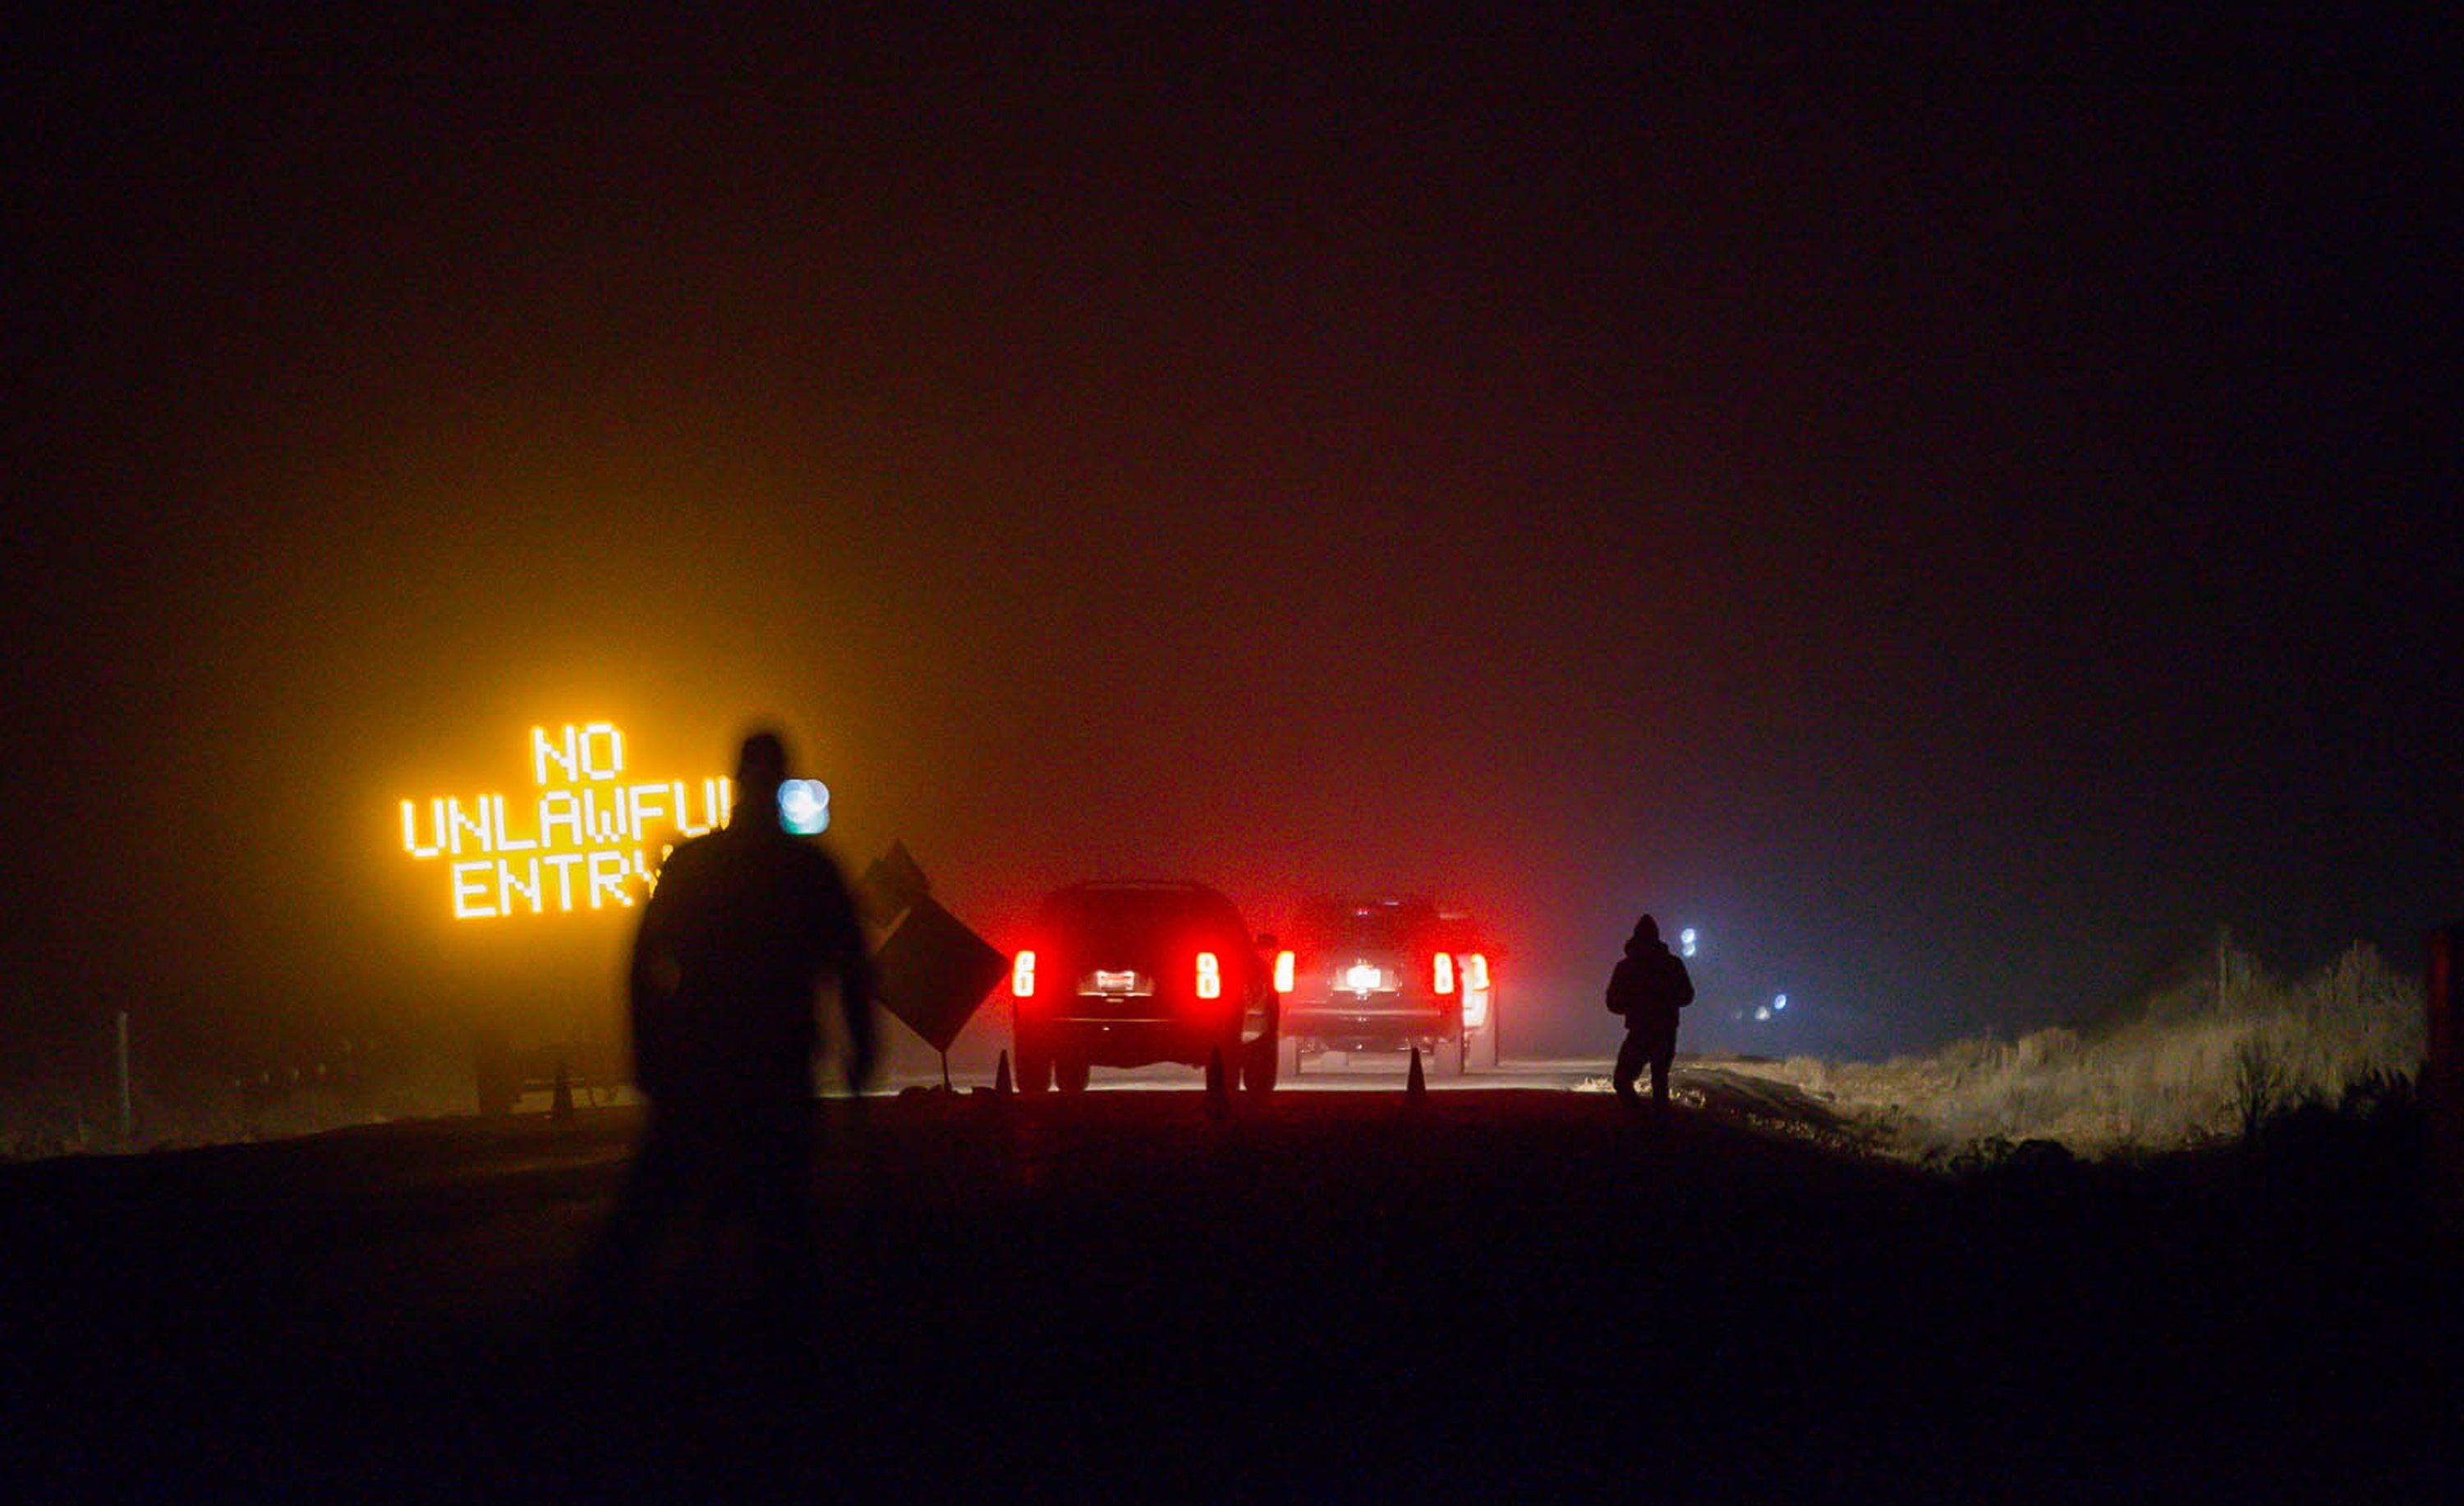 Three SUV proceeds through the Narrows roadblock near Burns, Ore., as FBI agents have surrounded the remaining four occupiers at the Malheur National Wildlife Refuge, on Wednesday, Feb.10, 2016. The four are the last remnants of an armed group that seized the Malheur National Wildlife Refuge on Jan. 2 to oppose federal land-use policies.